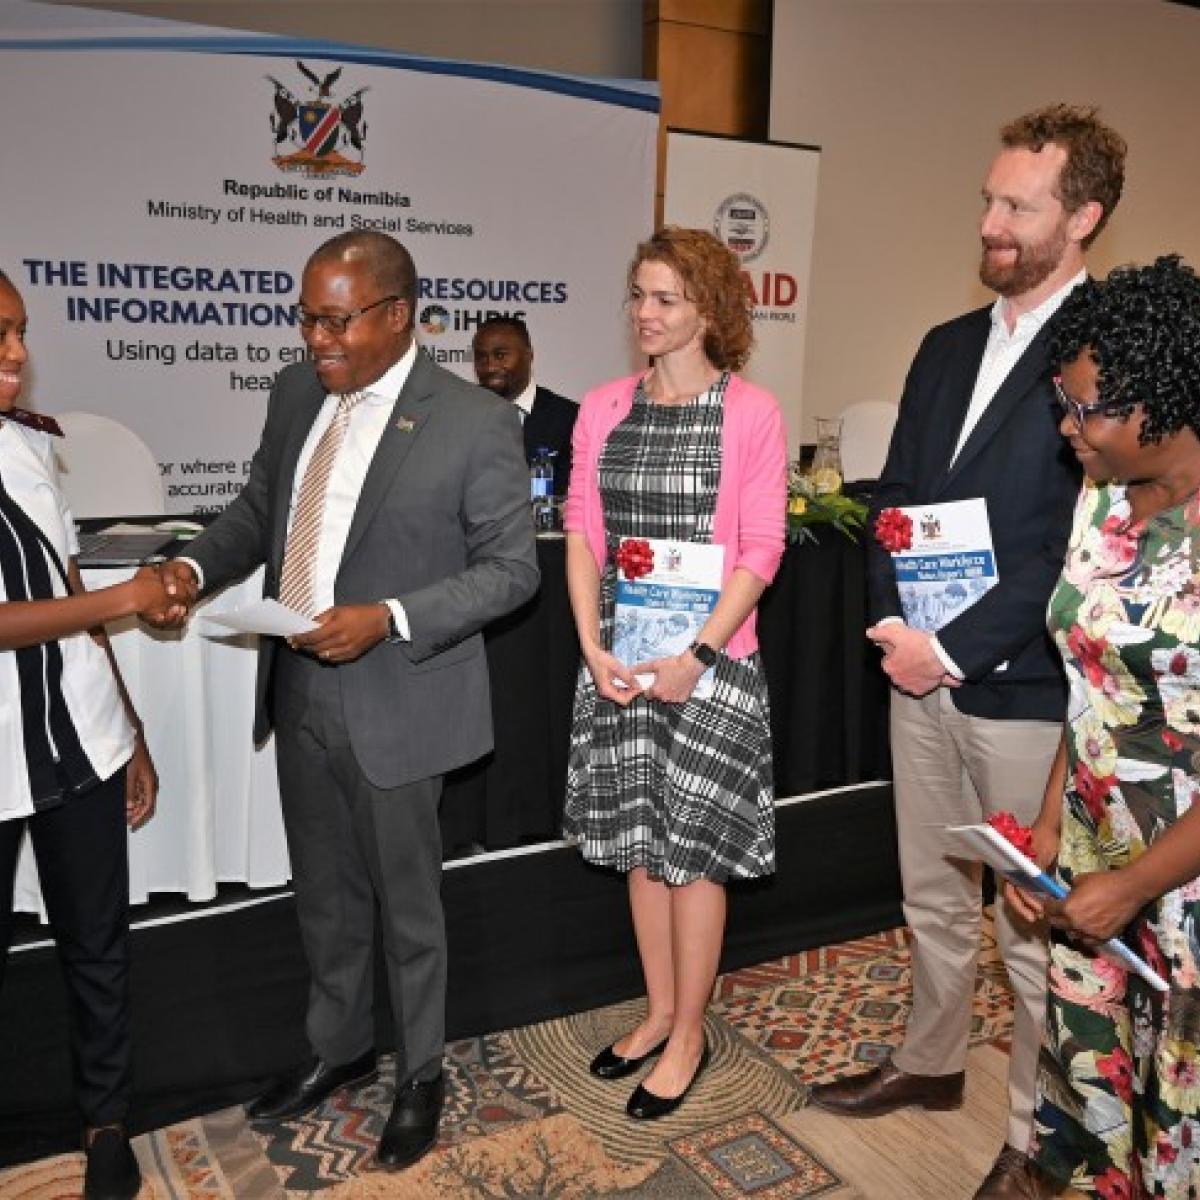 Ms. Letisia Haidula shakes hand with Mr. Ben Nangombe while Jessica Long and a couple representatives observe. The group stands in front of a table and screen about the Republic of Namibia's Ministry of Health and Social Services.